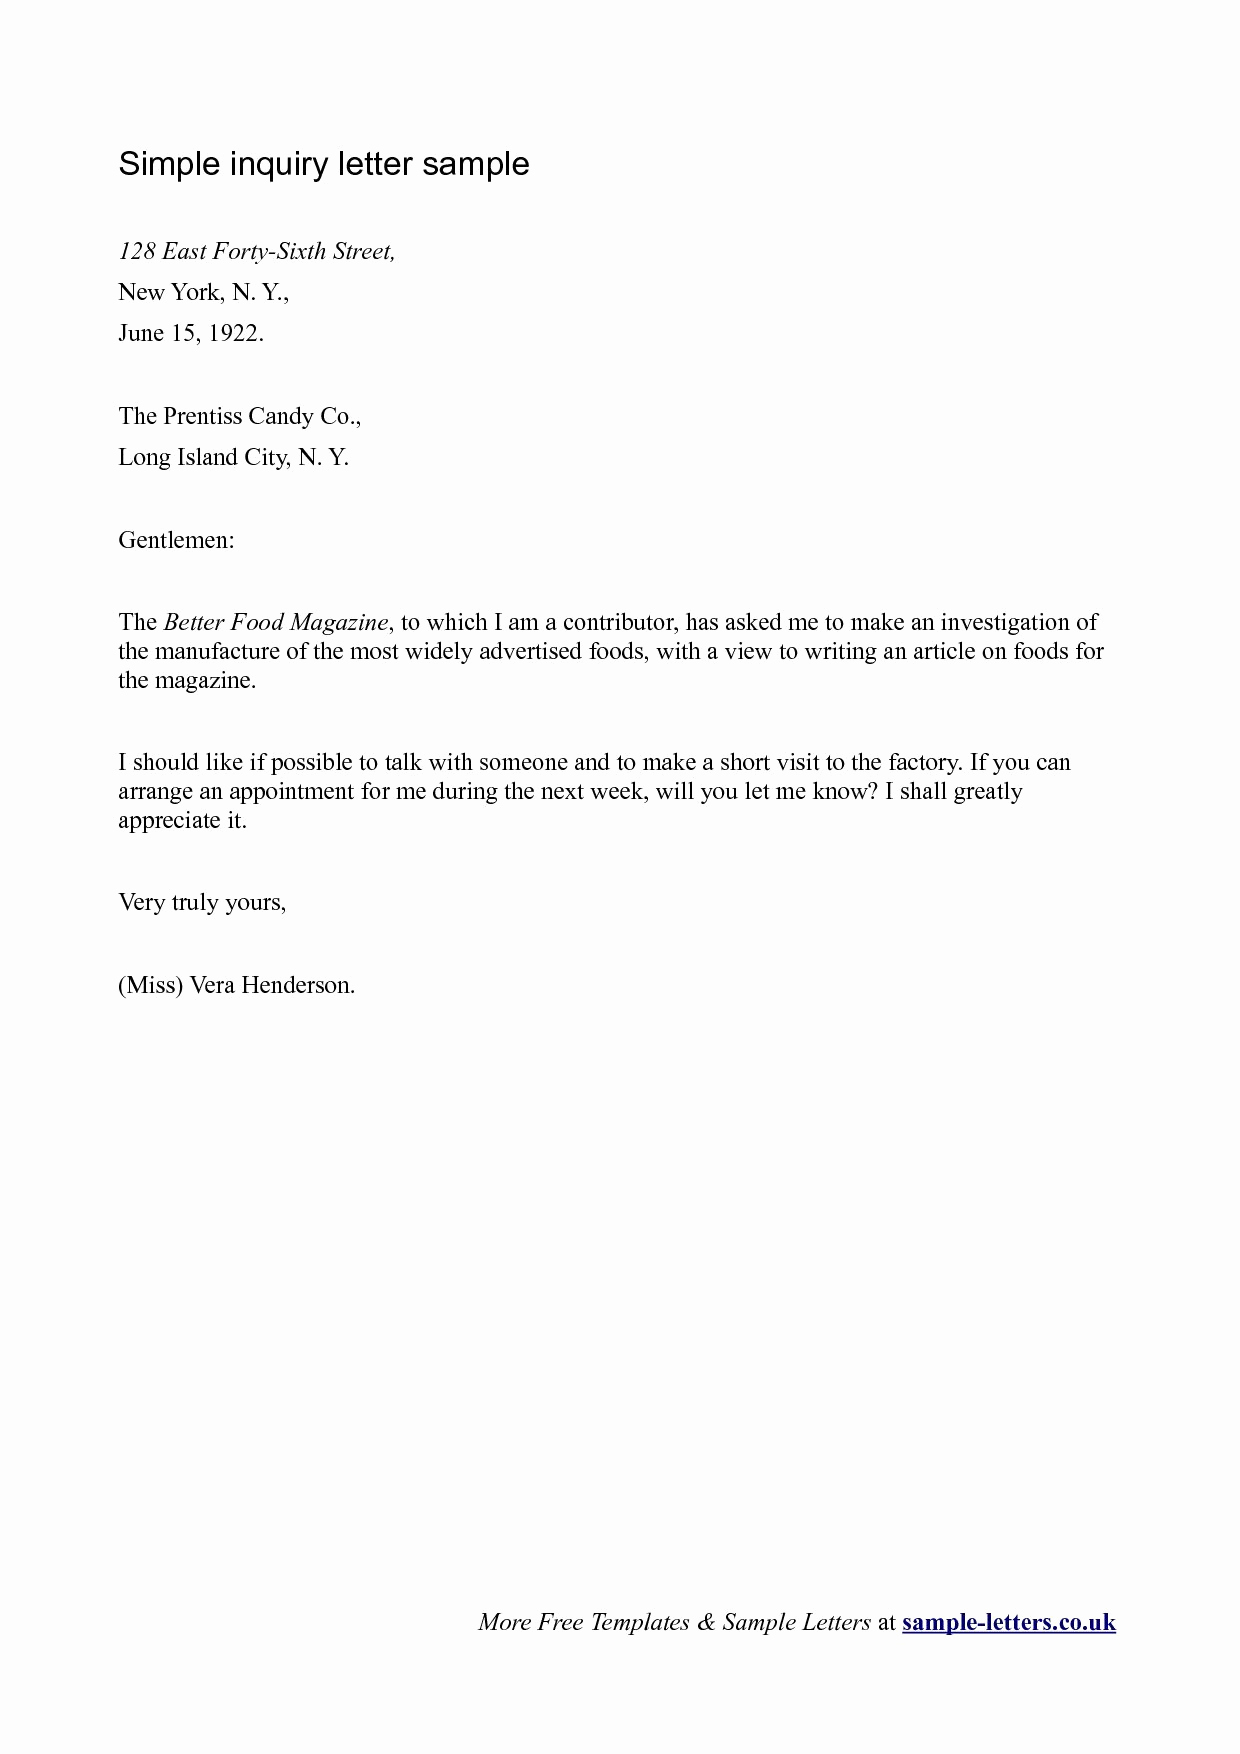 Sample Of Business Letters Lovely Business Letter Of Inquiry Sample the Letter Sample